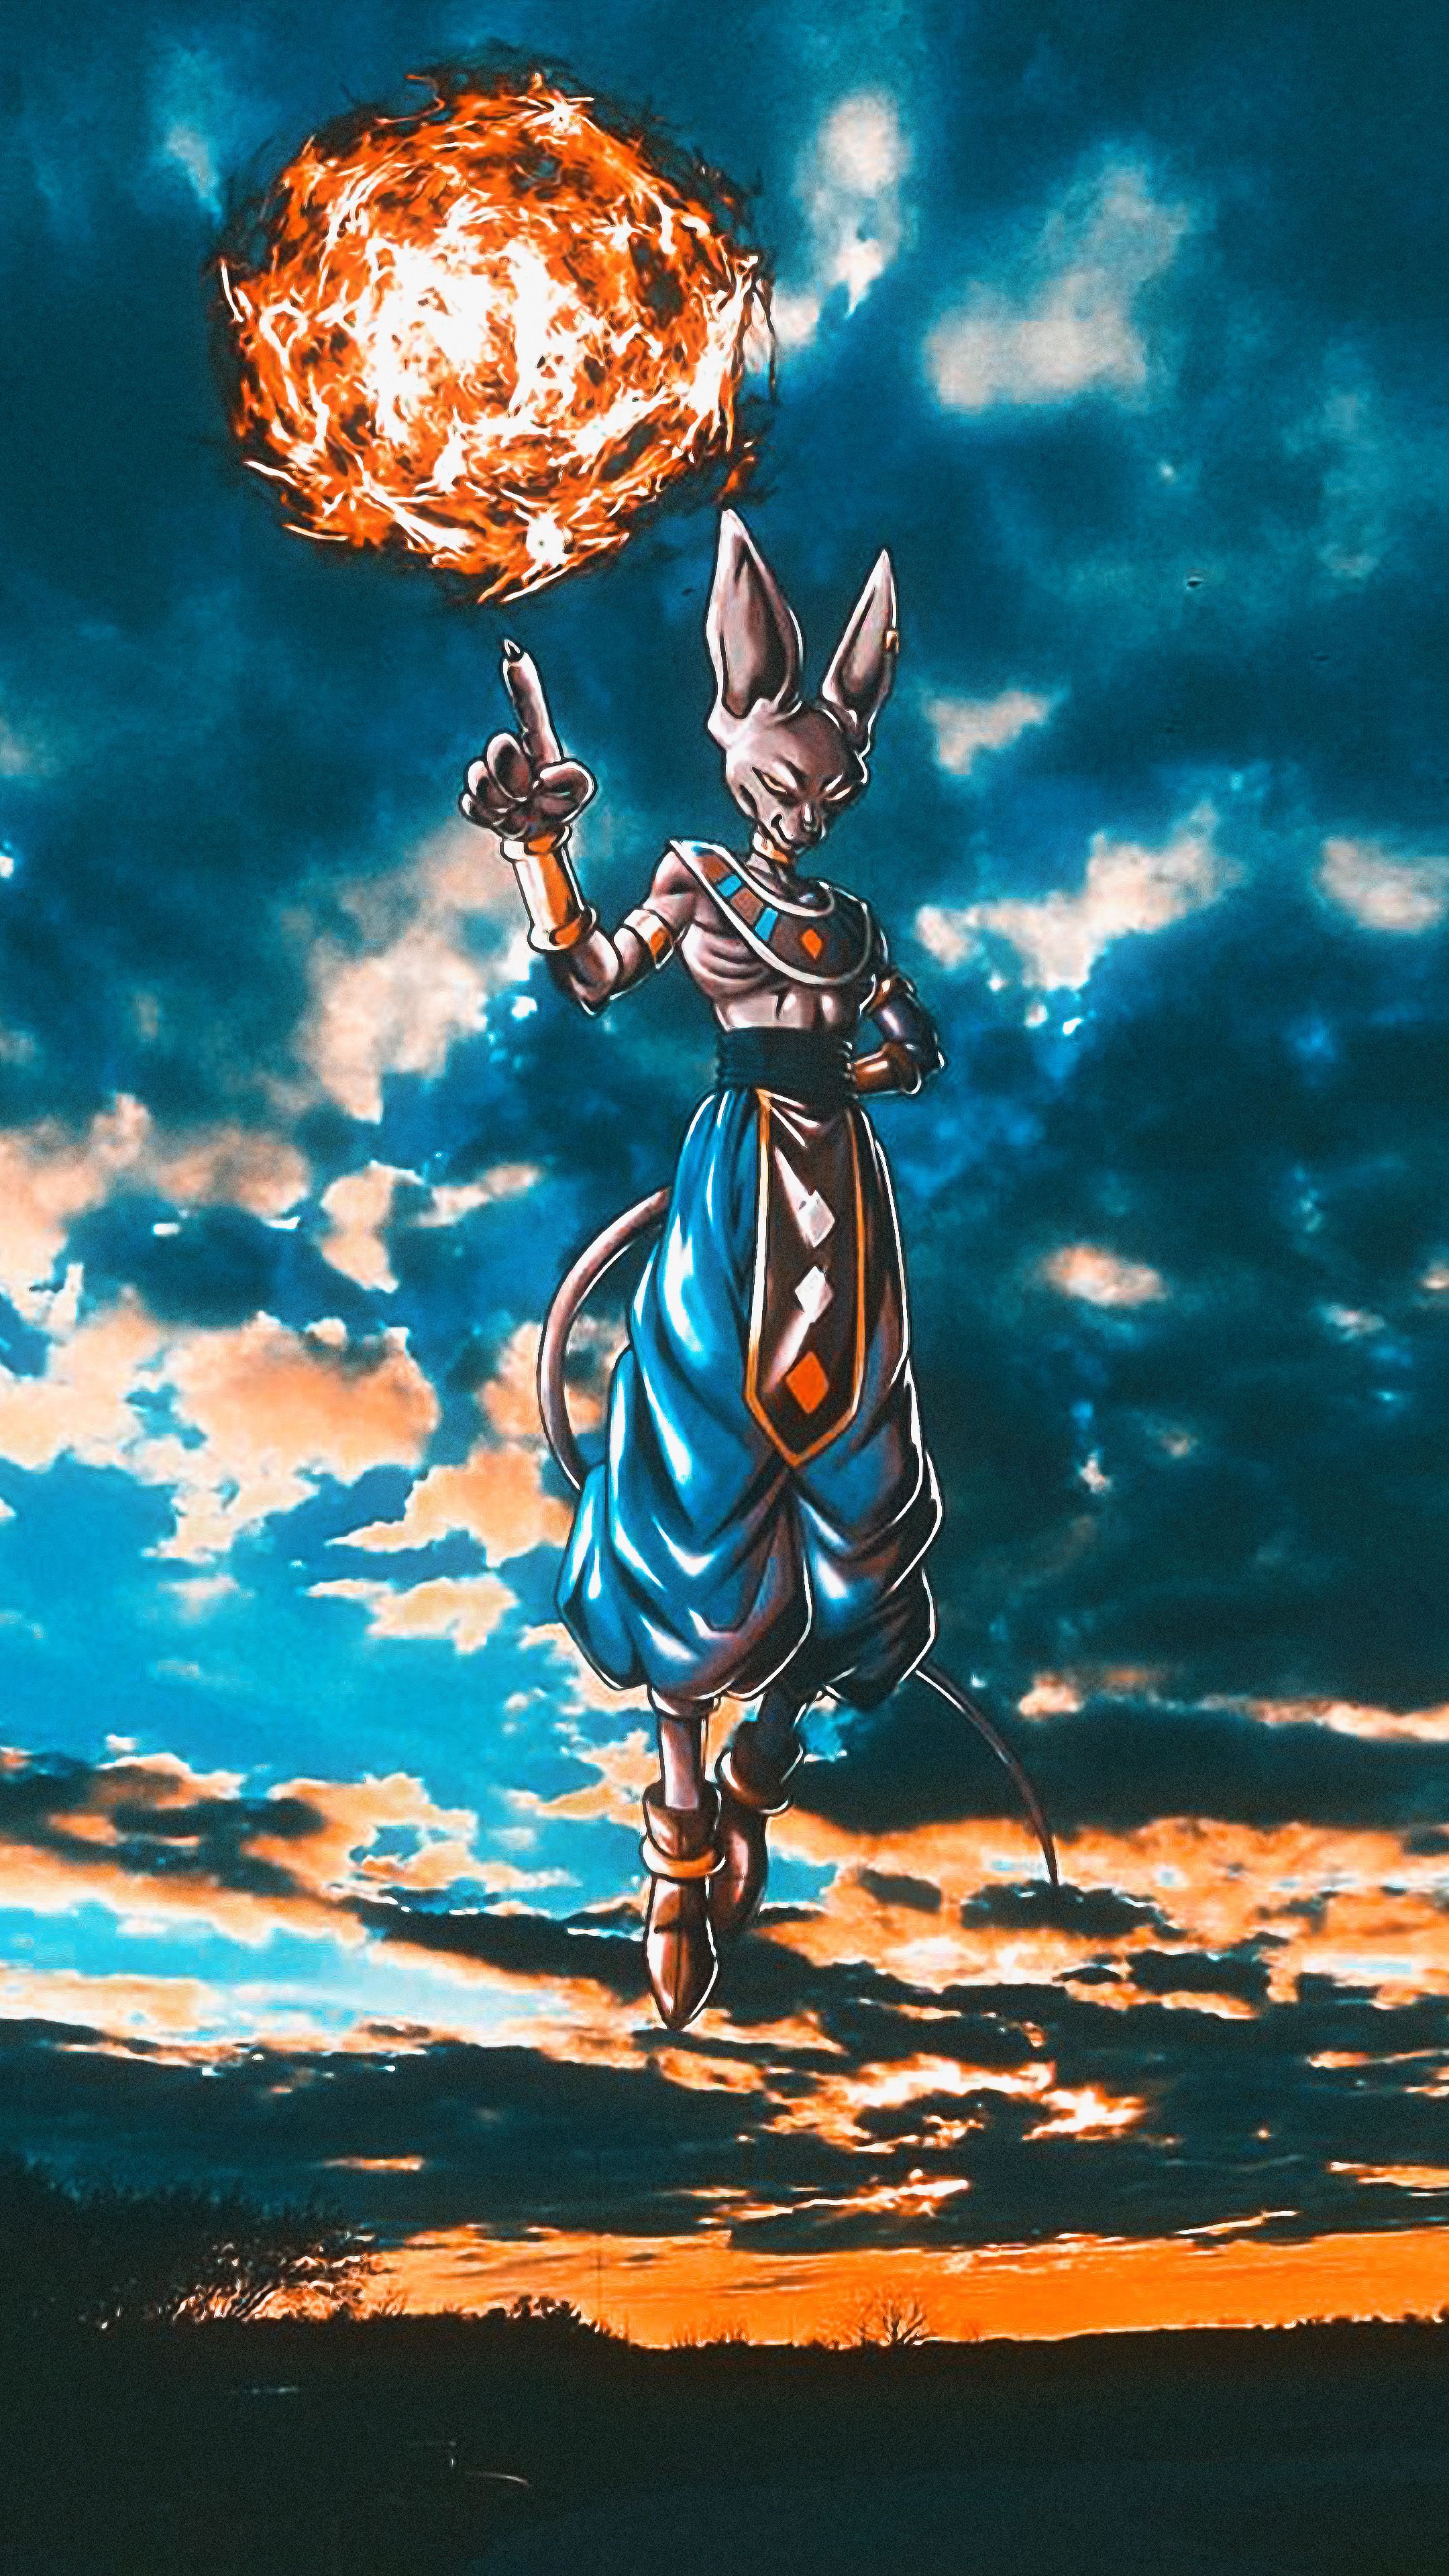 4K Wallpaper of DBZ and Super for Phones